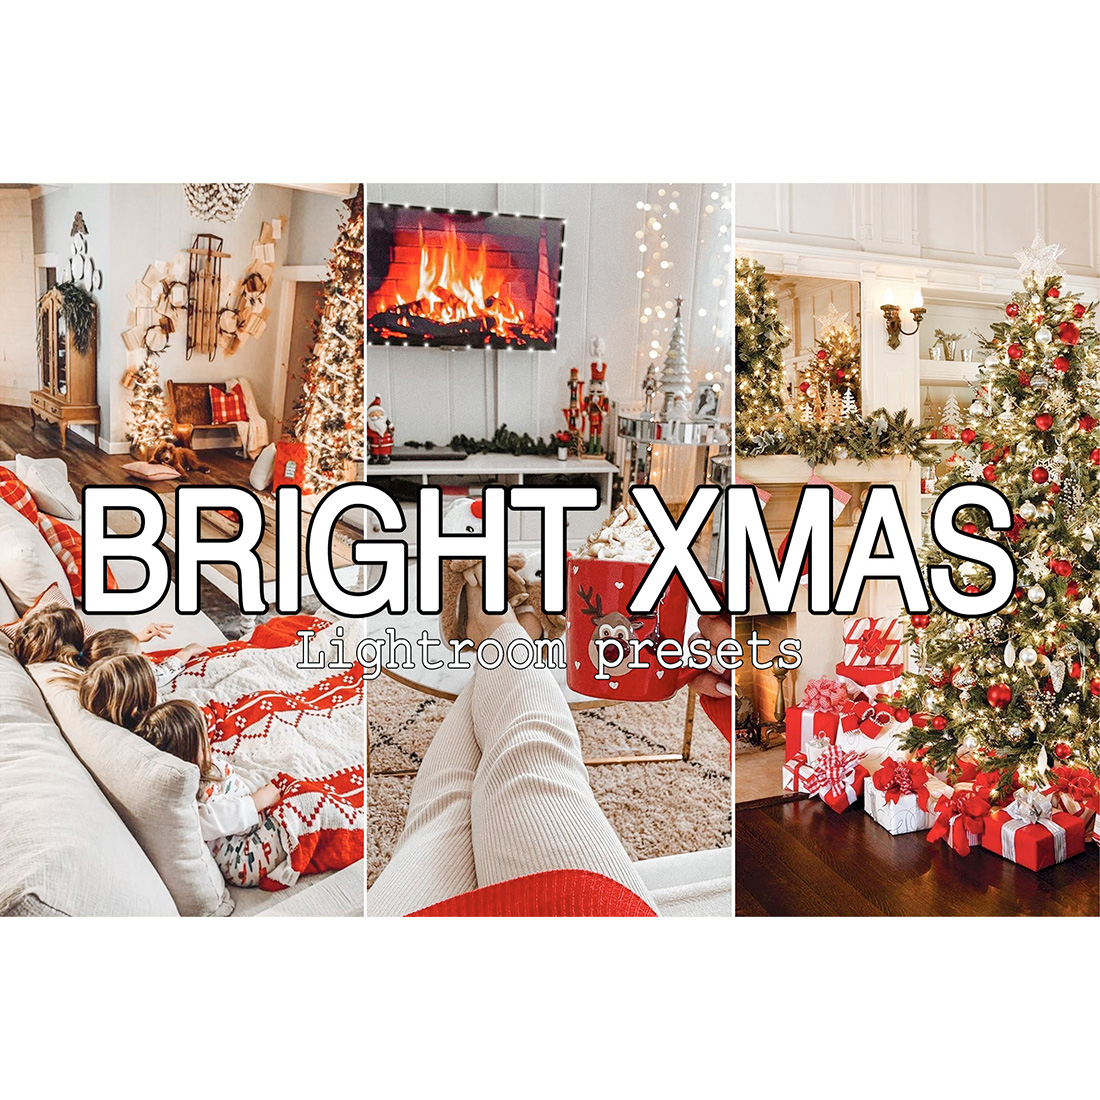 Bright Xmas from Christmas Bundle Mobile and Desktop Lightroom Presets.